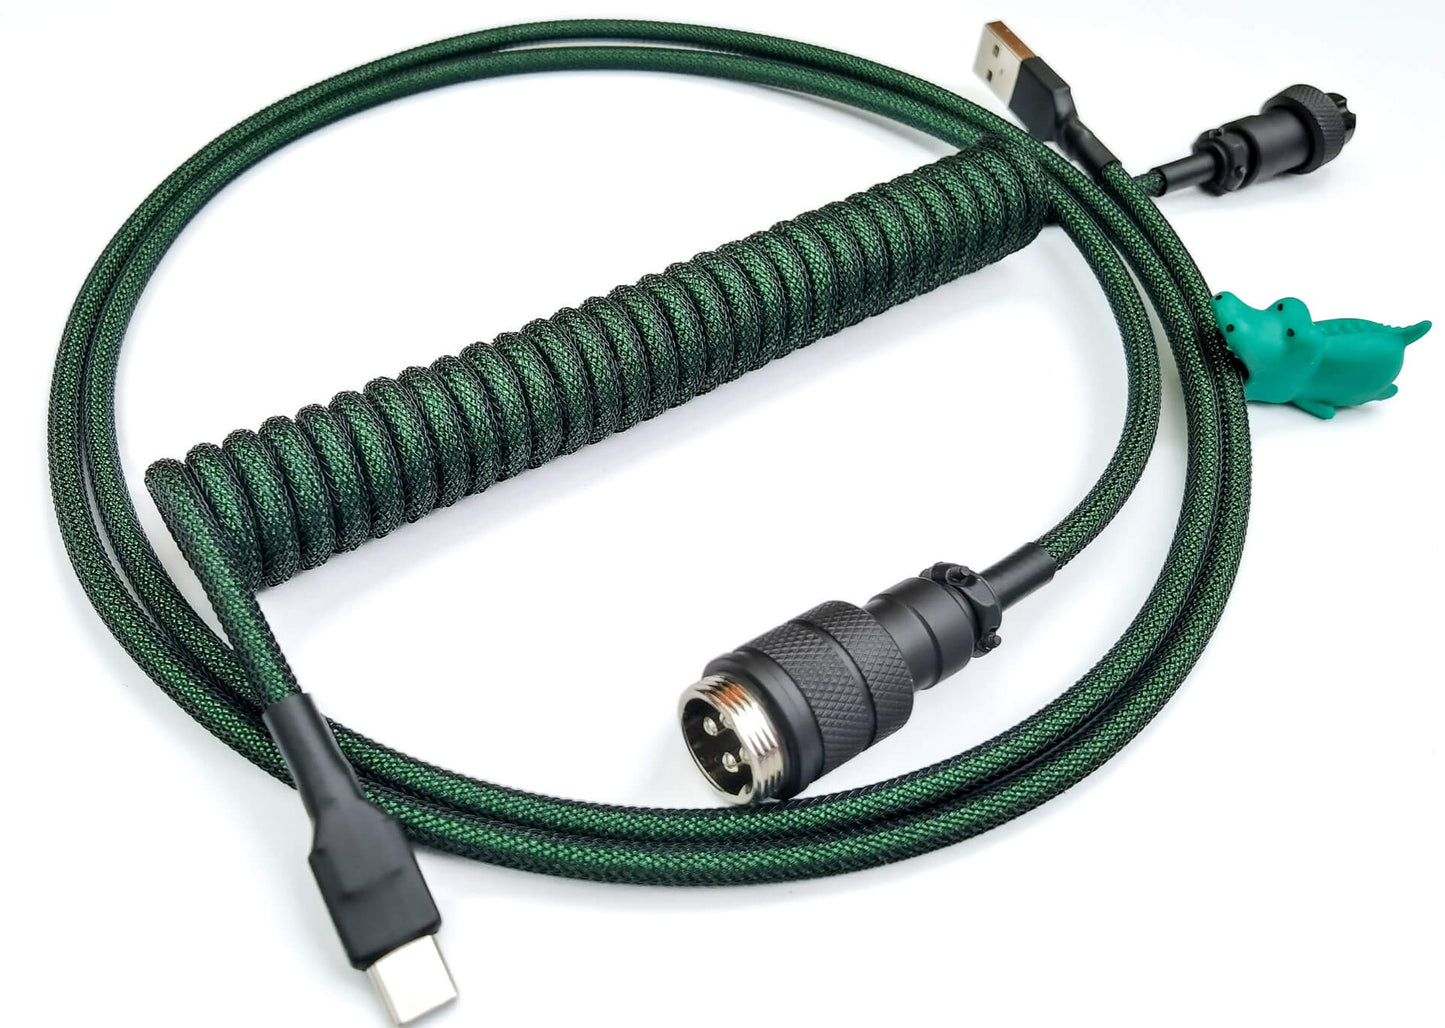 Dark green coiled cable